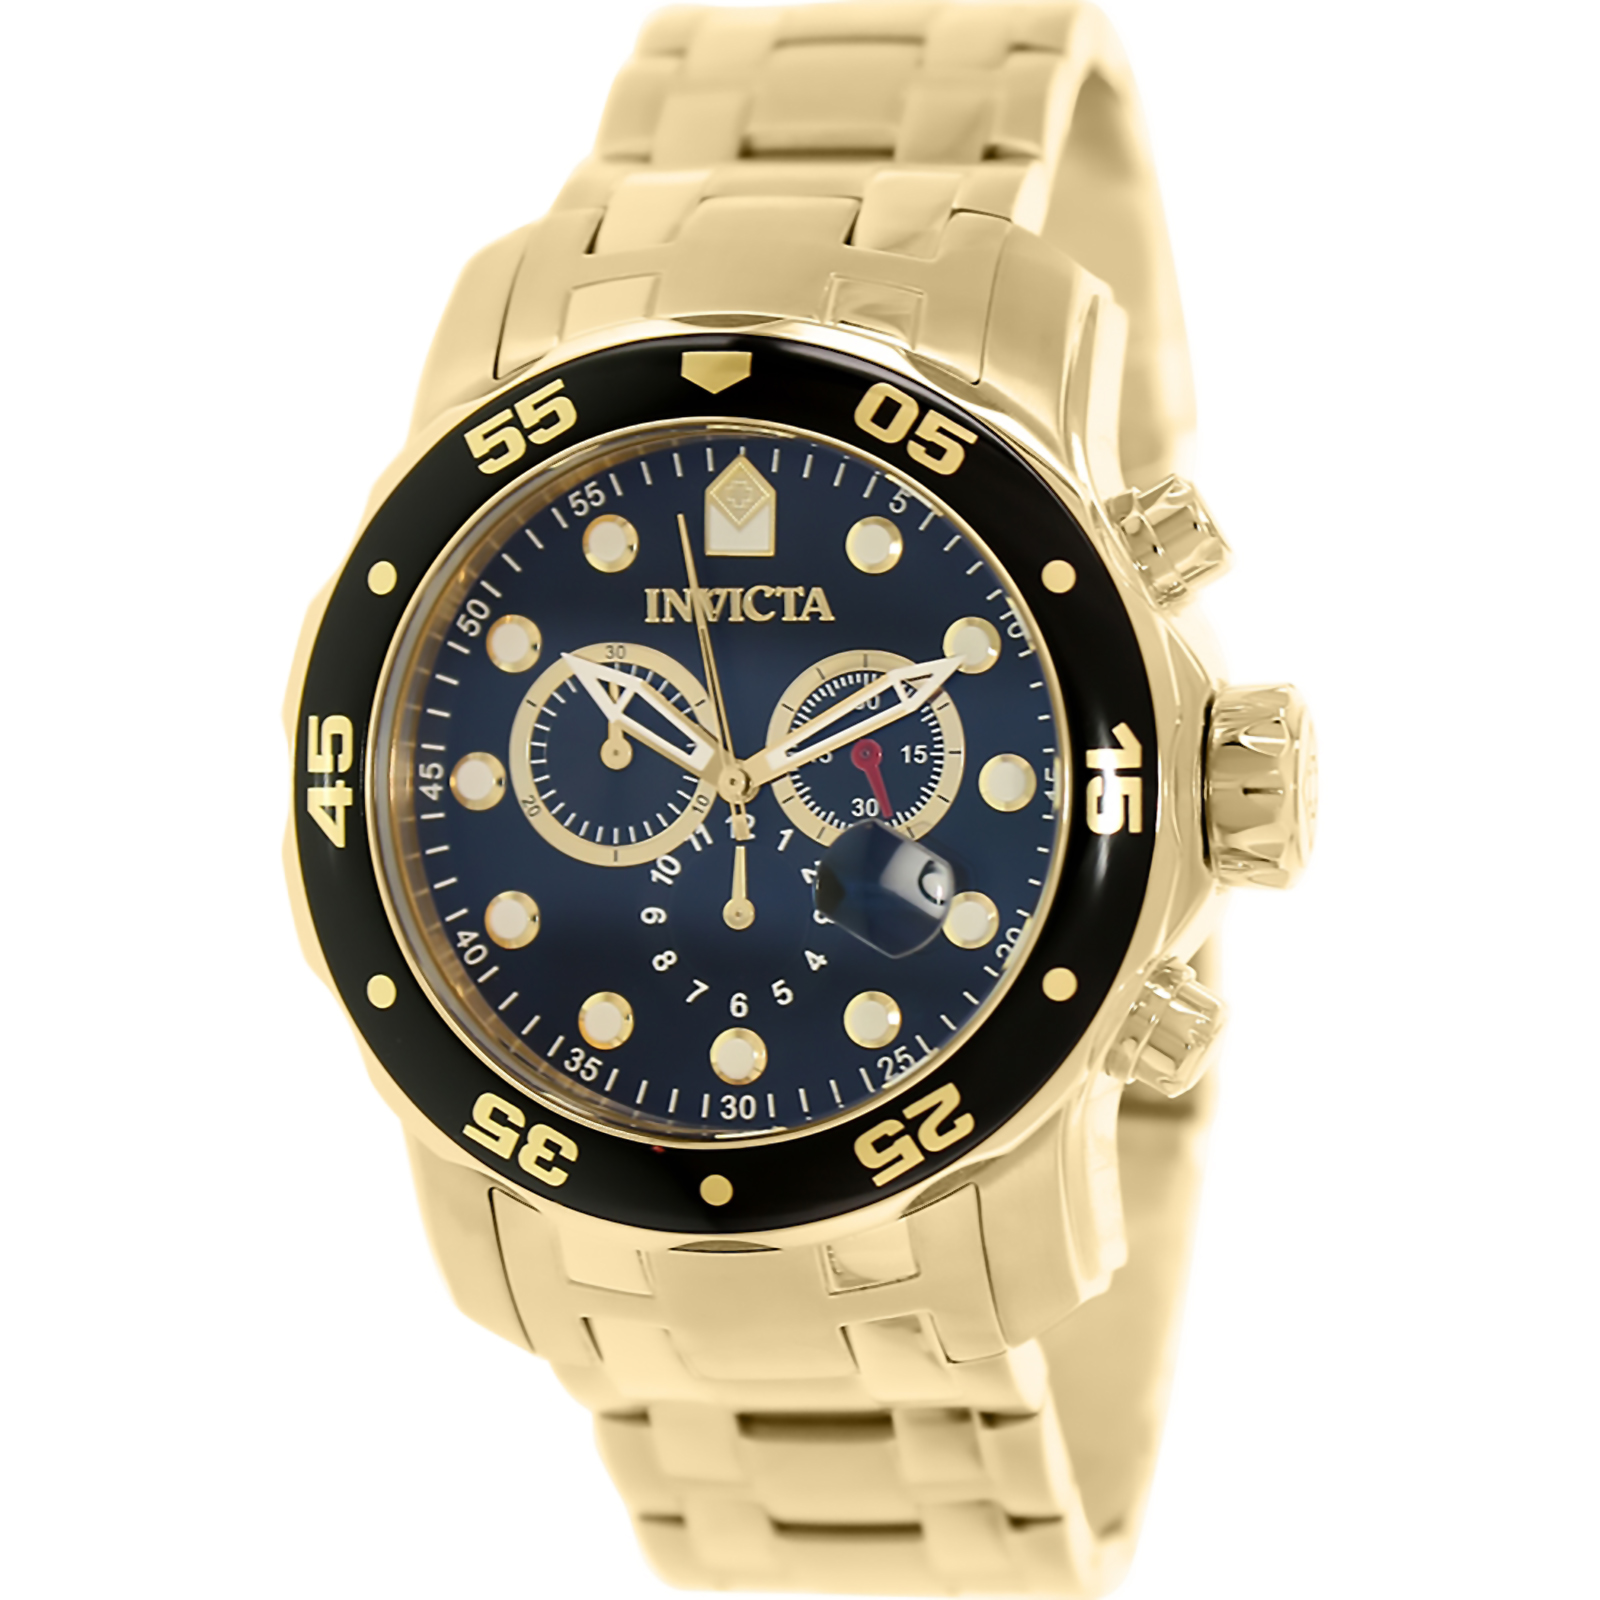 Invicta 0072 Men’s Pro Diver Stainless Steel Chronograph Watch - Black and Gold